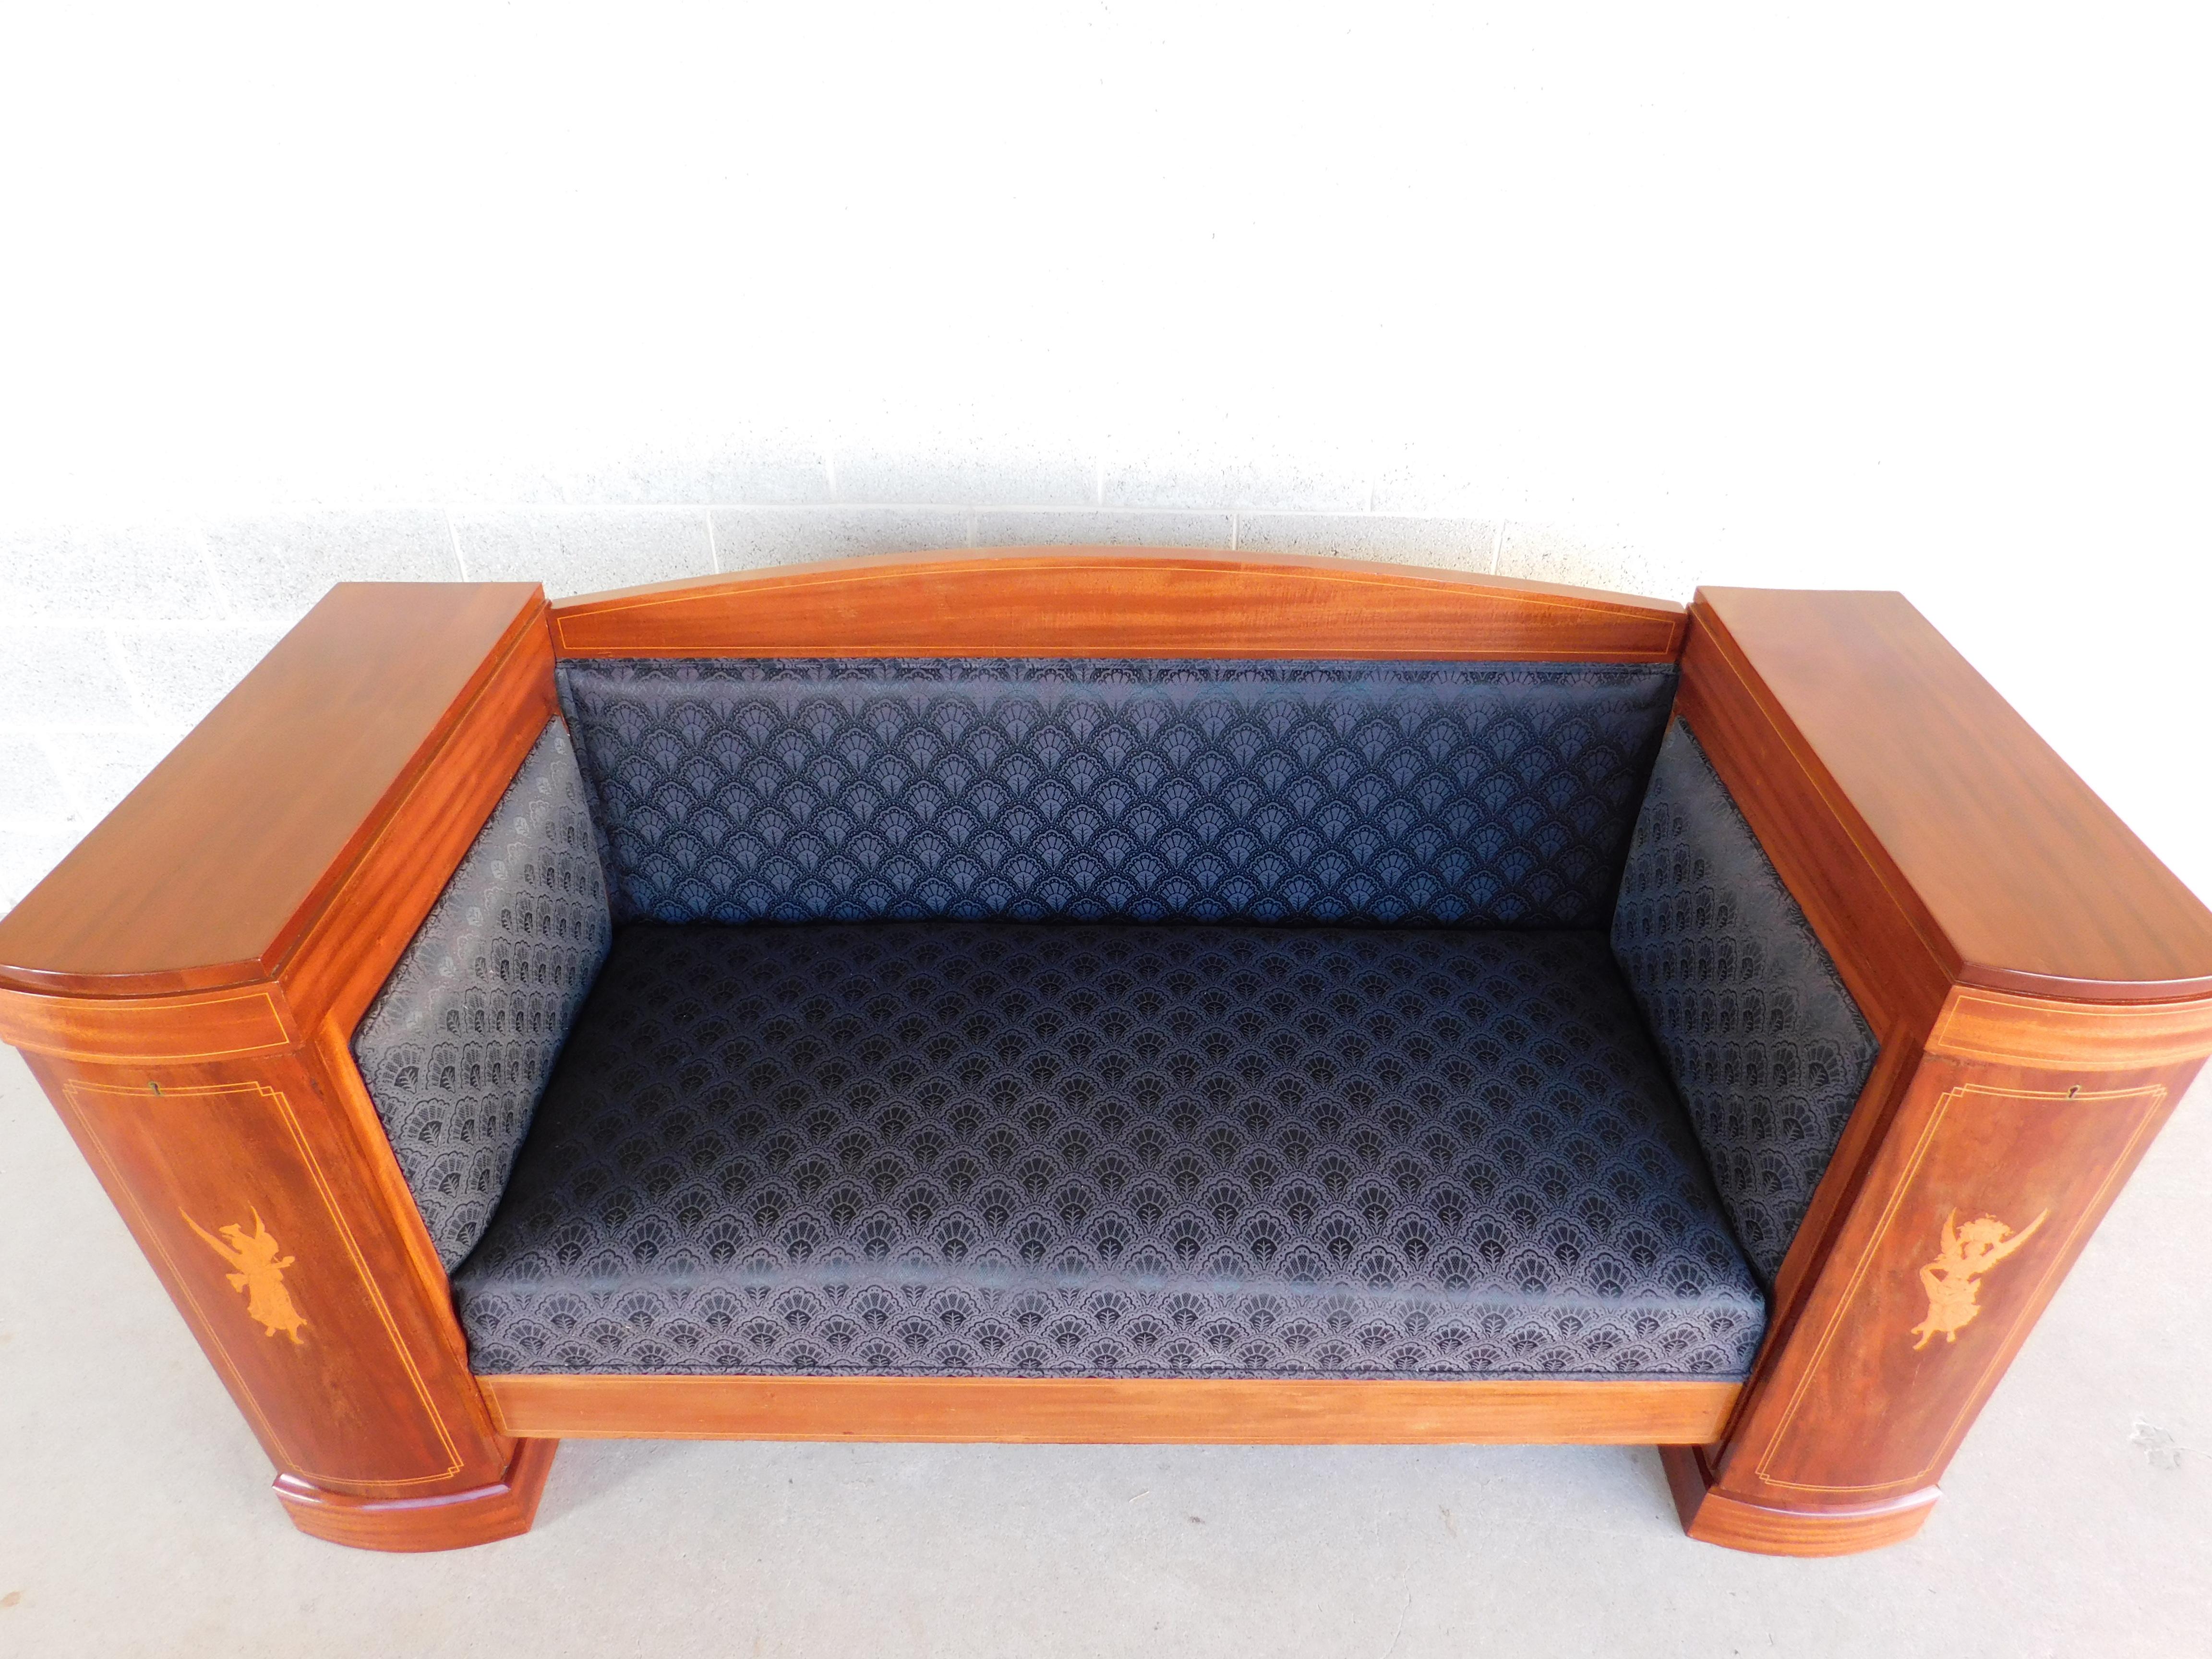 Antique Mid 19th Century Mahogany and Inlay Biedermeier Settee Sofa For Sale 1